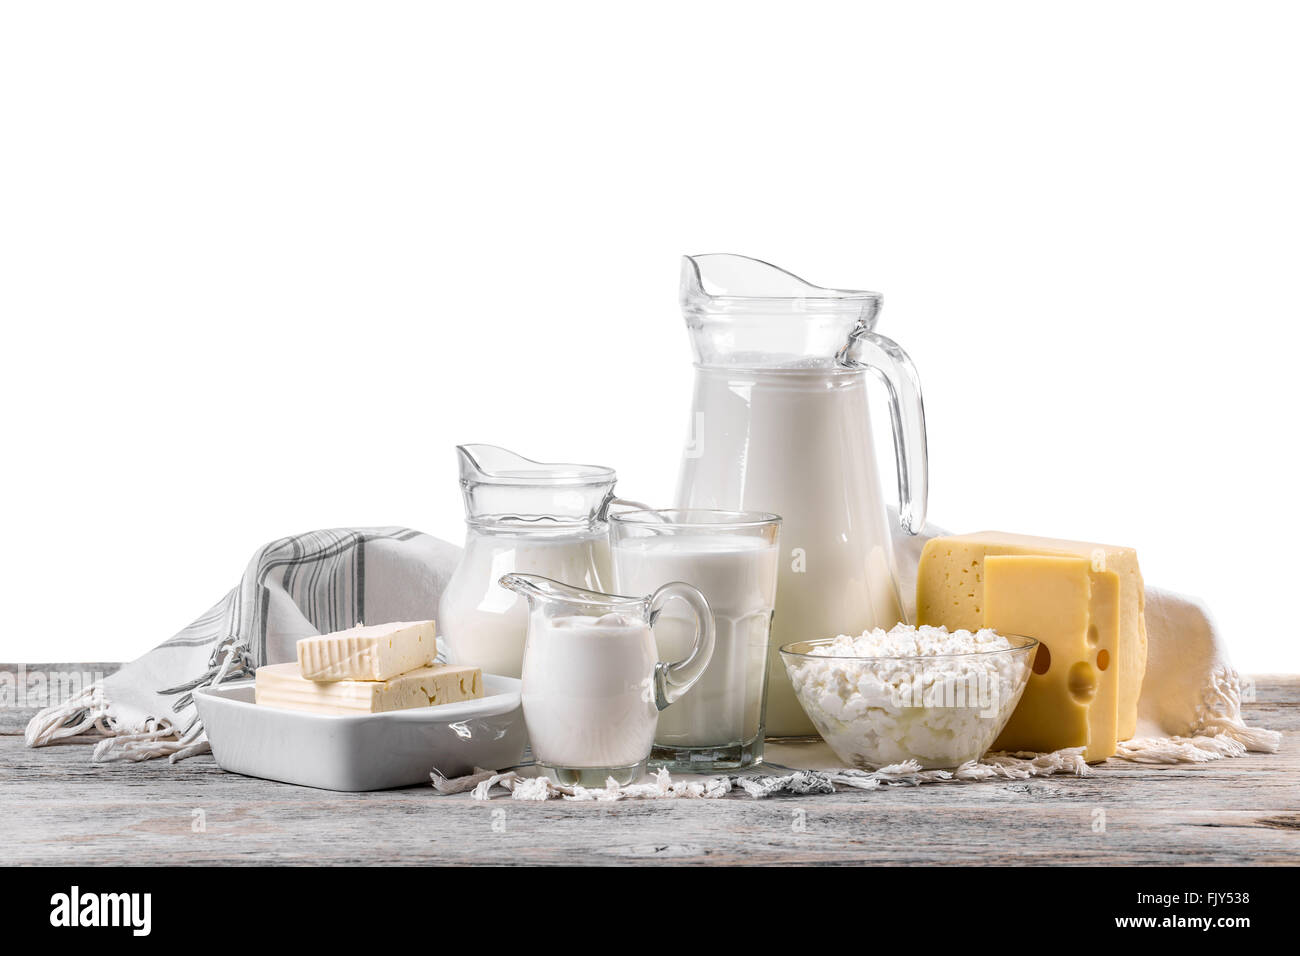 Fresh dairy products on an old wooden board Stock Photo